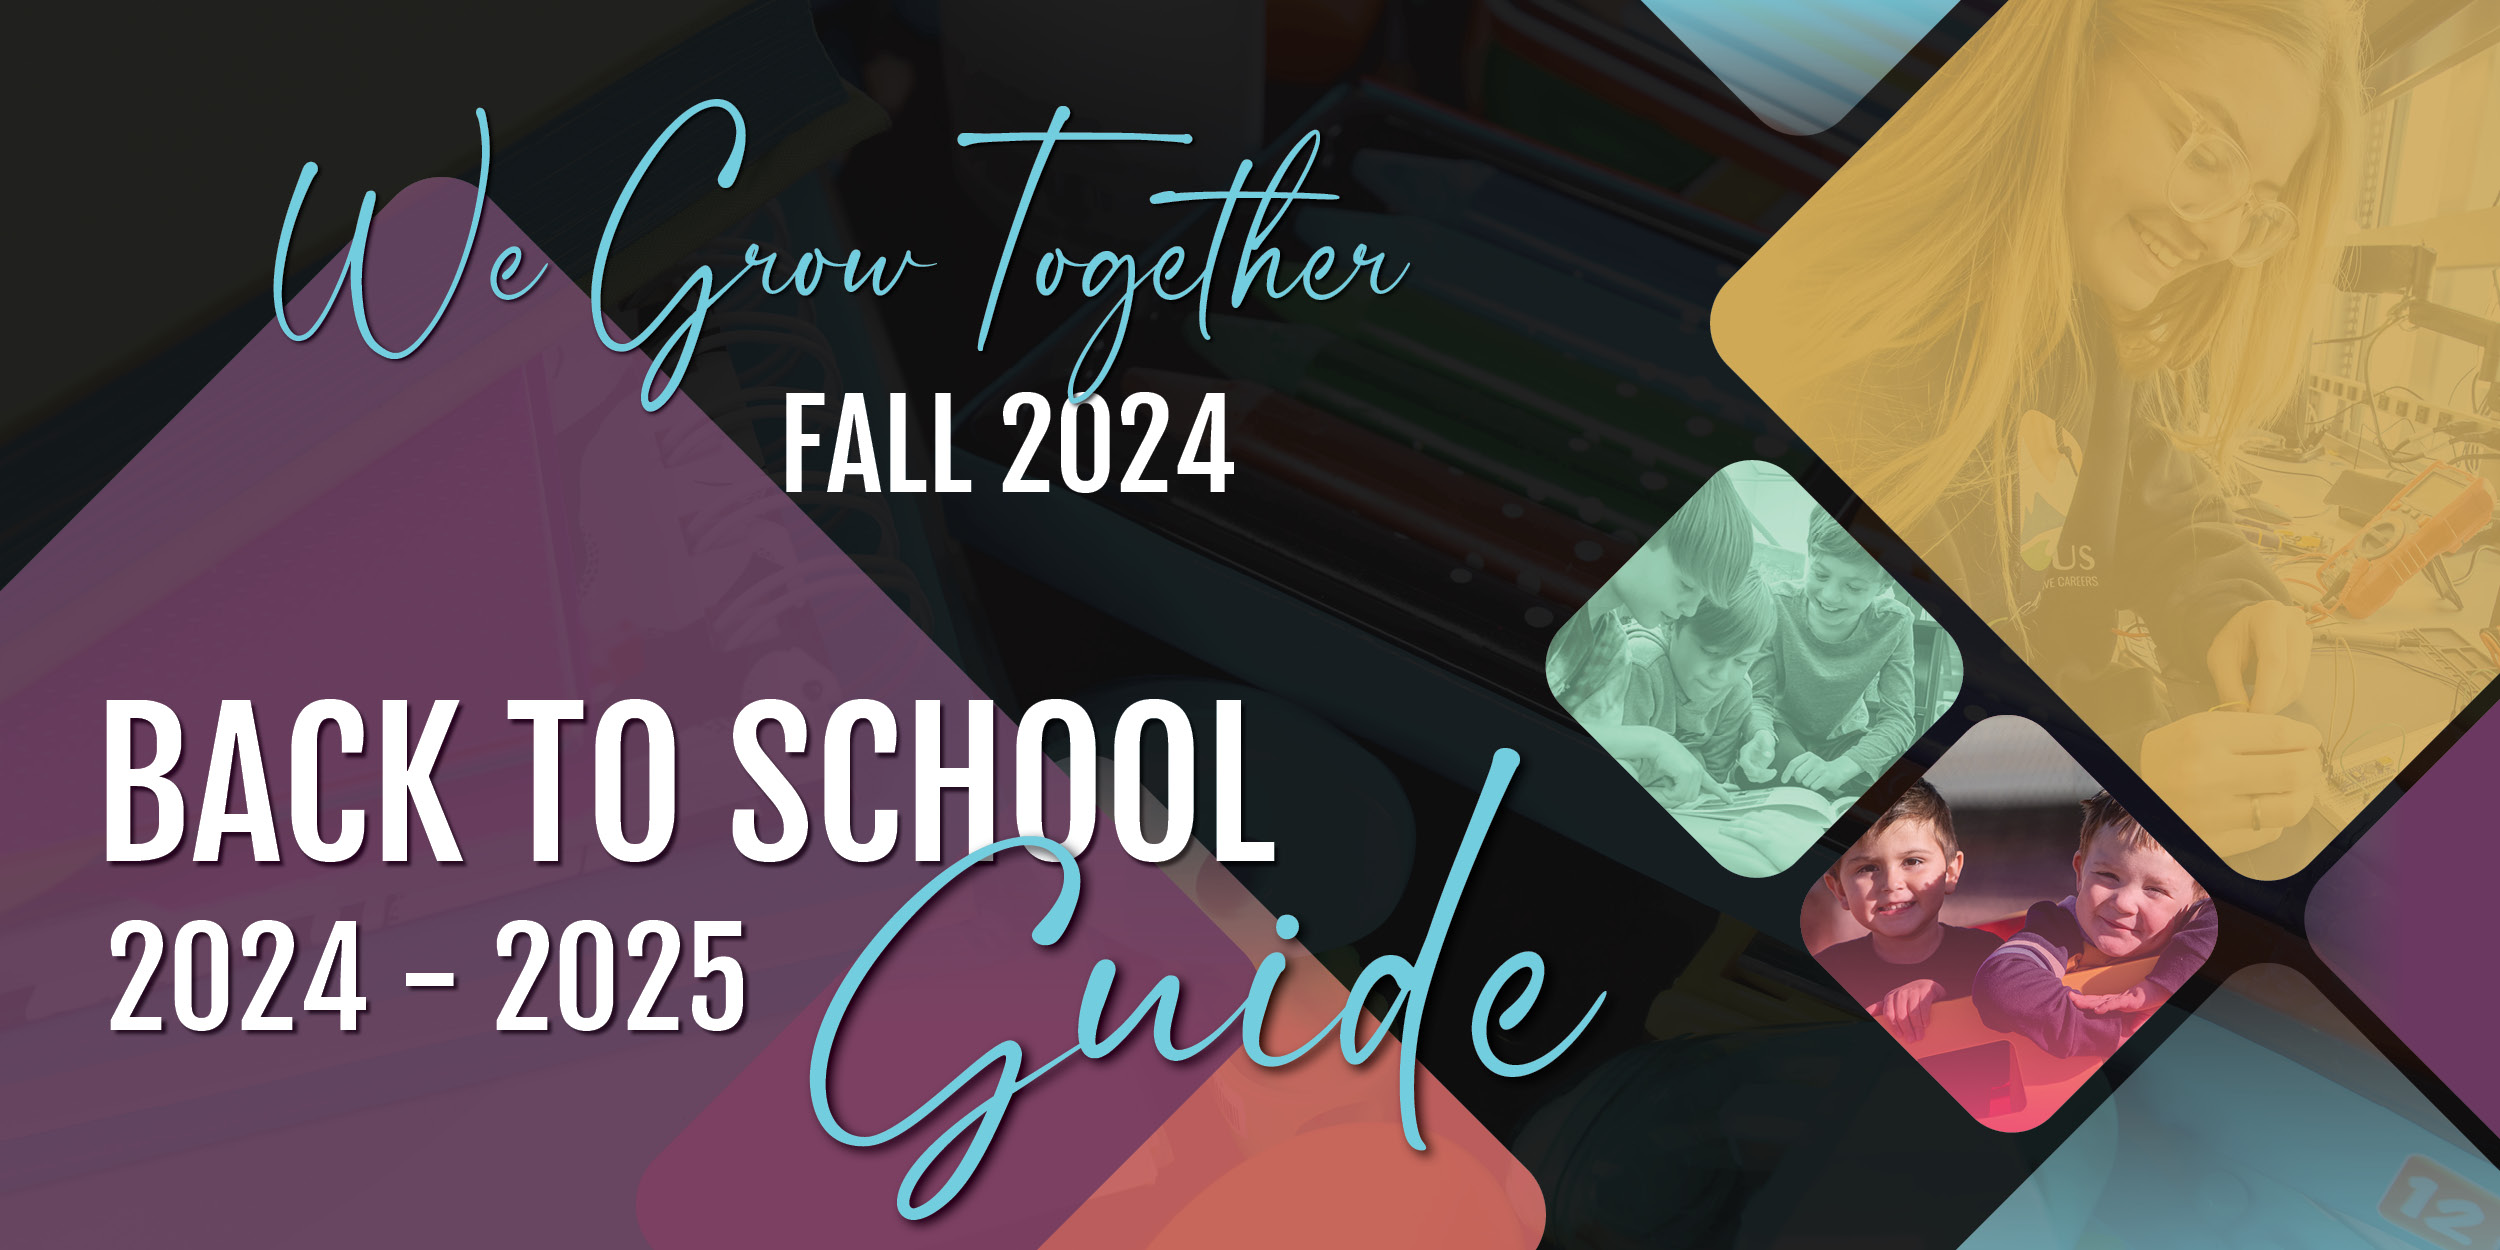 We Grow Together Back to School Guide Fall 2024